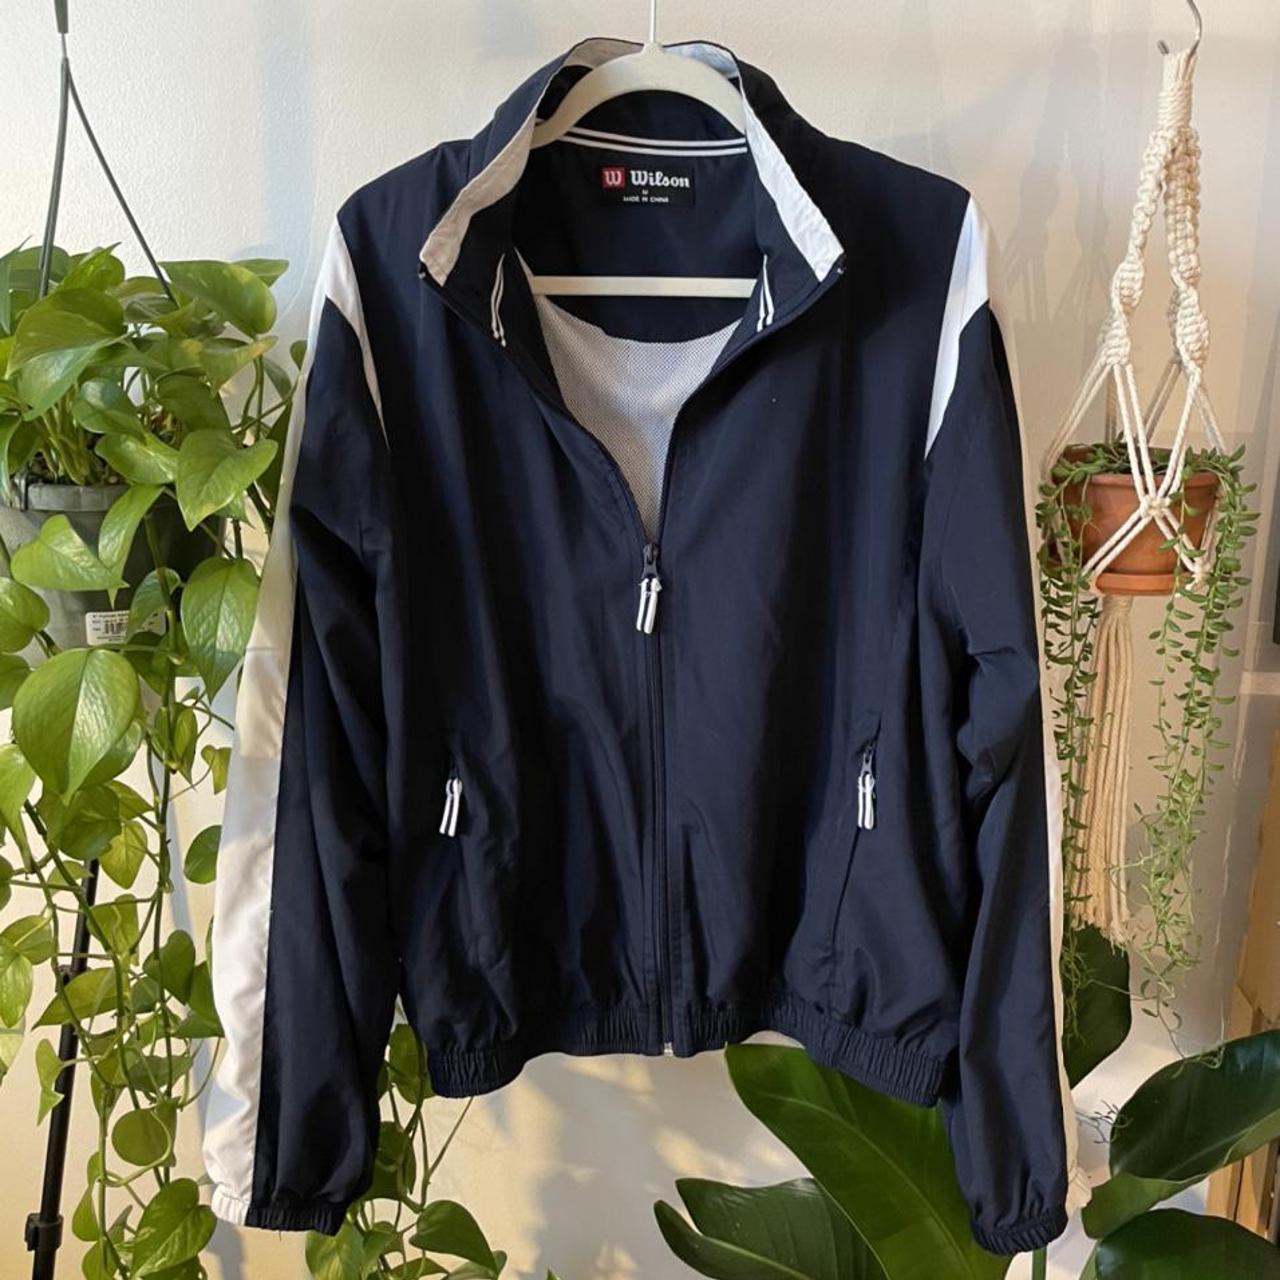 Men's Navy and White Jacket